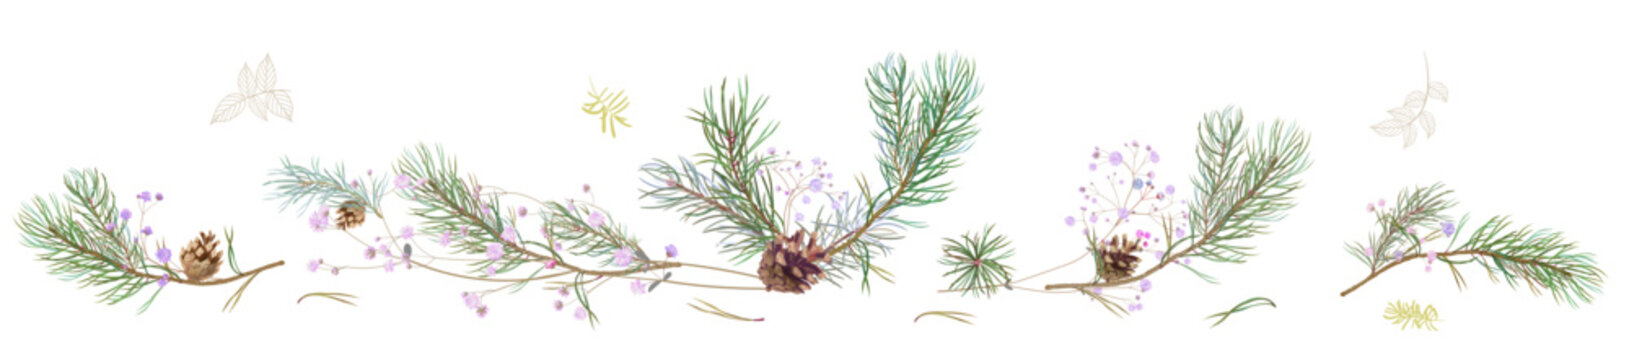 Horizontal panoramic border with pine branches, cones, needles, blue small flowers on white background. Realistic digital Christmas tree in watercolor style. Botanical illustration for design, vector